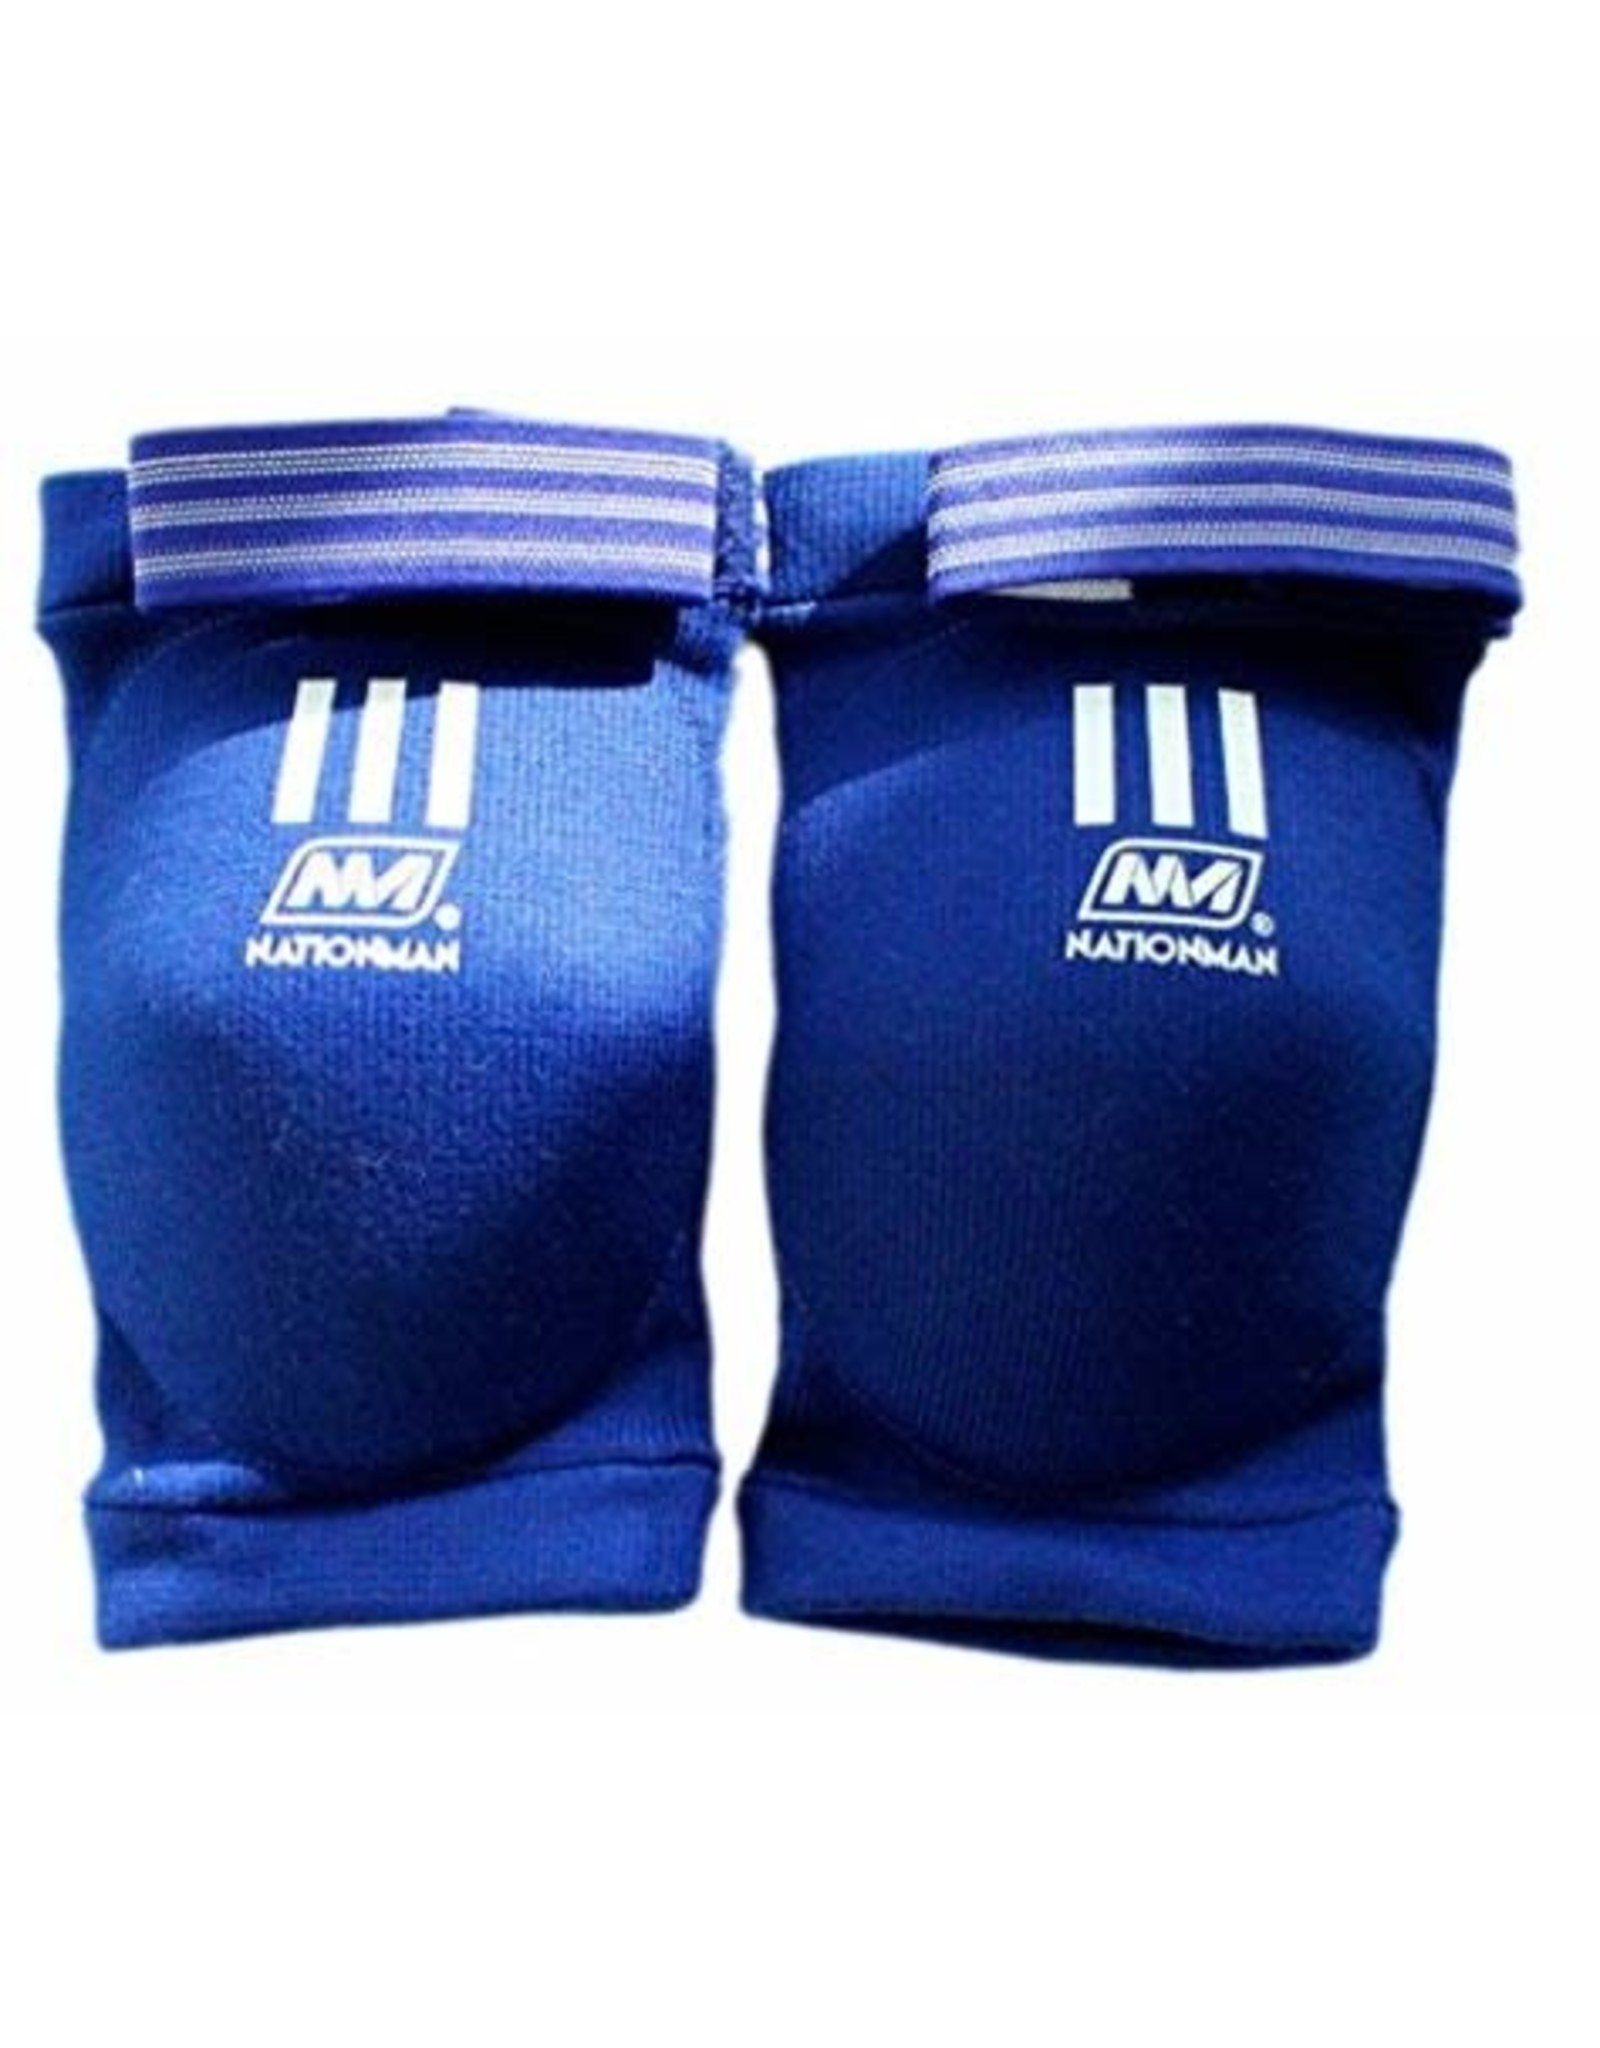 Nationman Elbow Pads